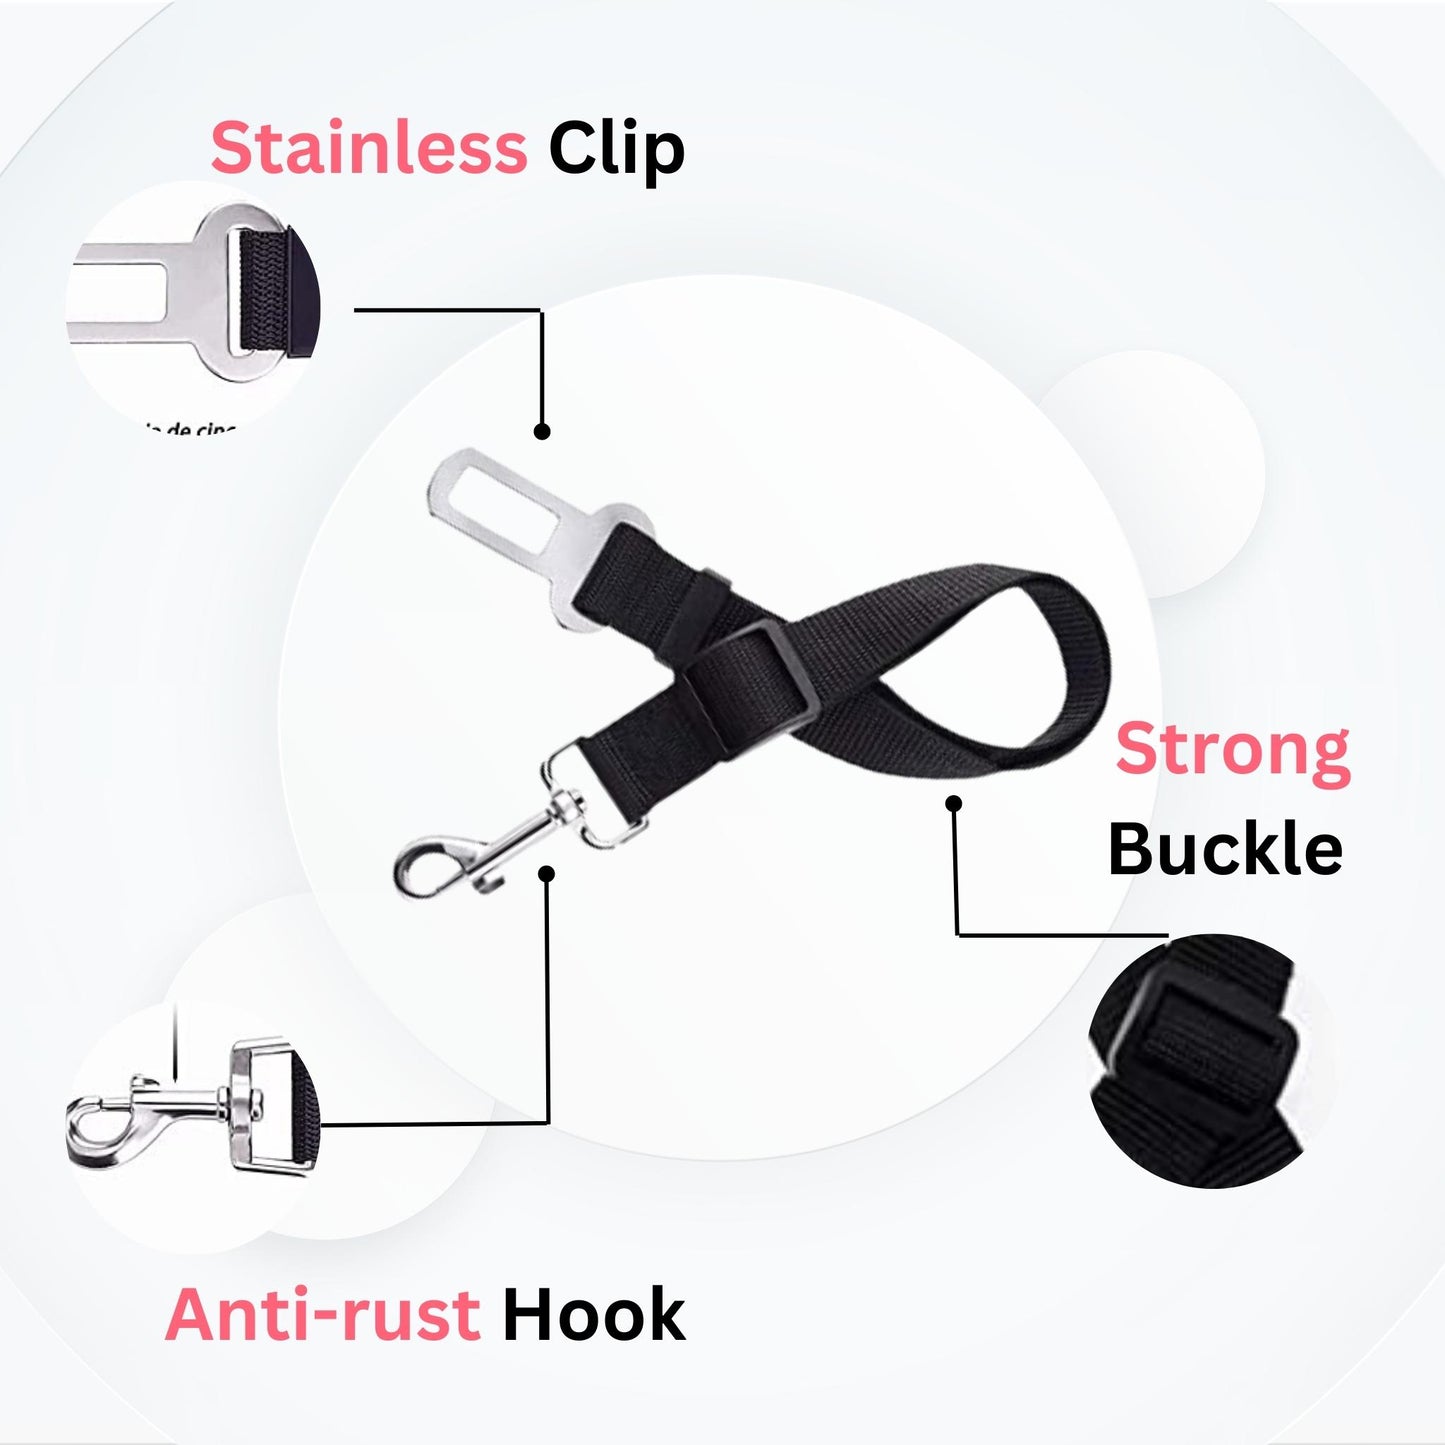 Foodie Puppies Adjustable Leash Cum Car Seat Belt for Dogs and Cats